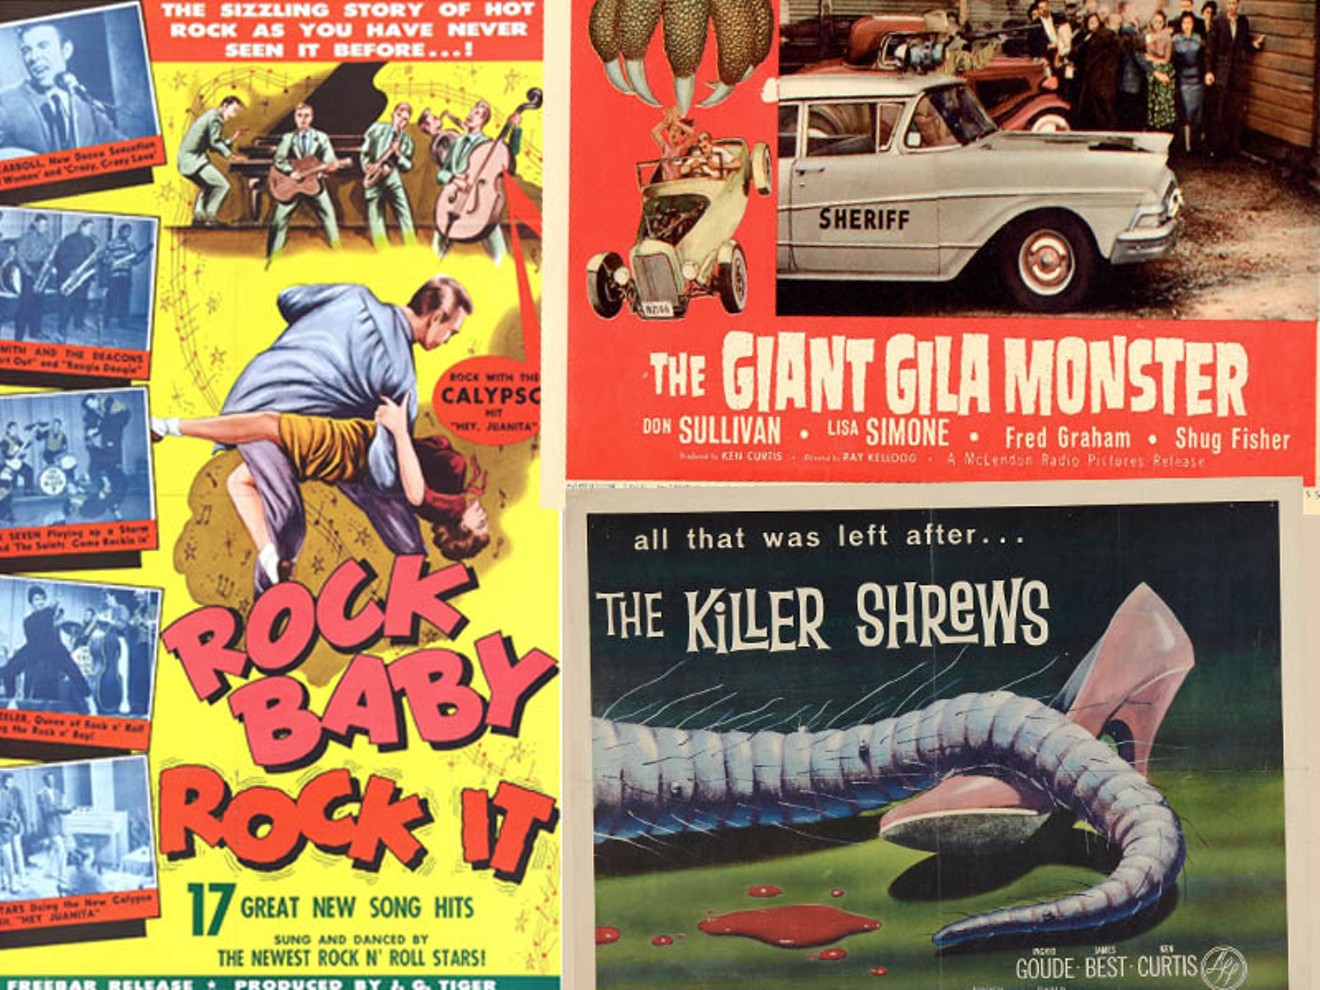 Some of Hollywood's best worst movies were shot in Dallas including such classics as the rock 'n' roll schlockfest Rock, Baby, Rock It! and gigantic animal horrors like The Killer Shrews and The Giant Gila Monster.